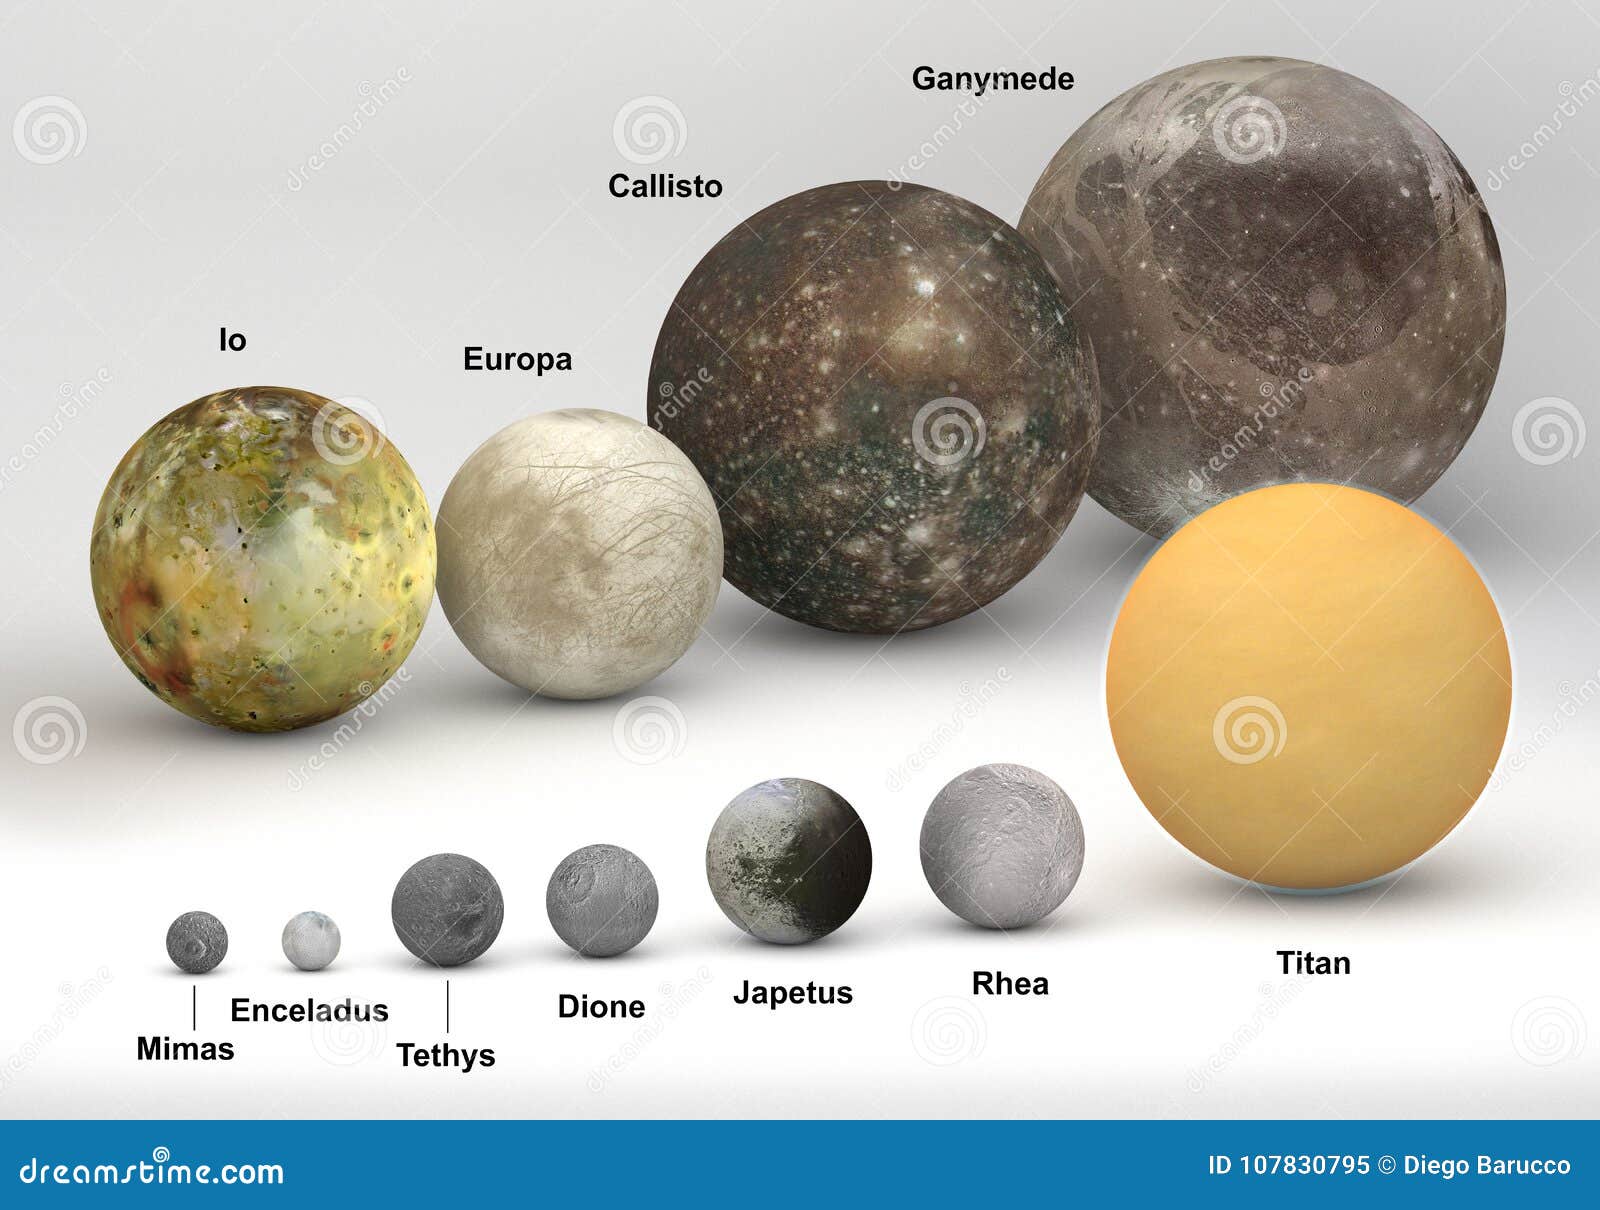 size comparison between saturn and jupiter moons with captions